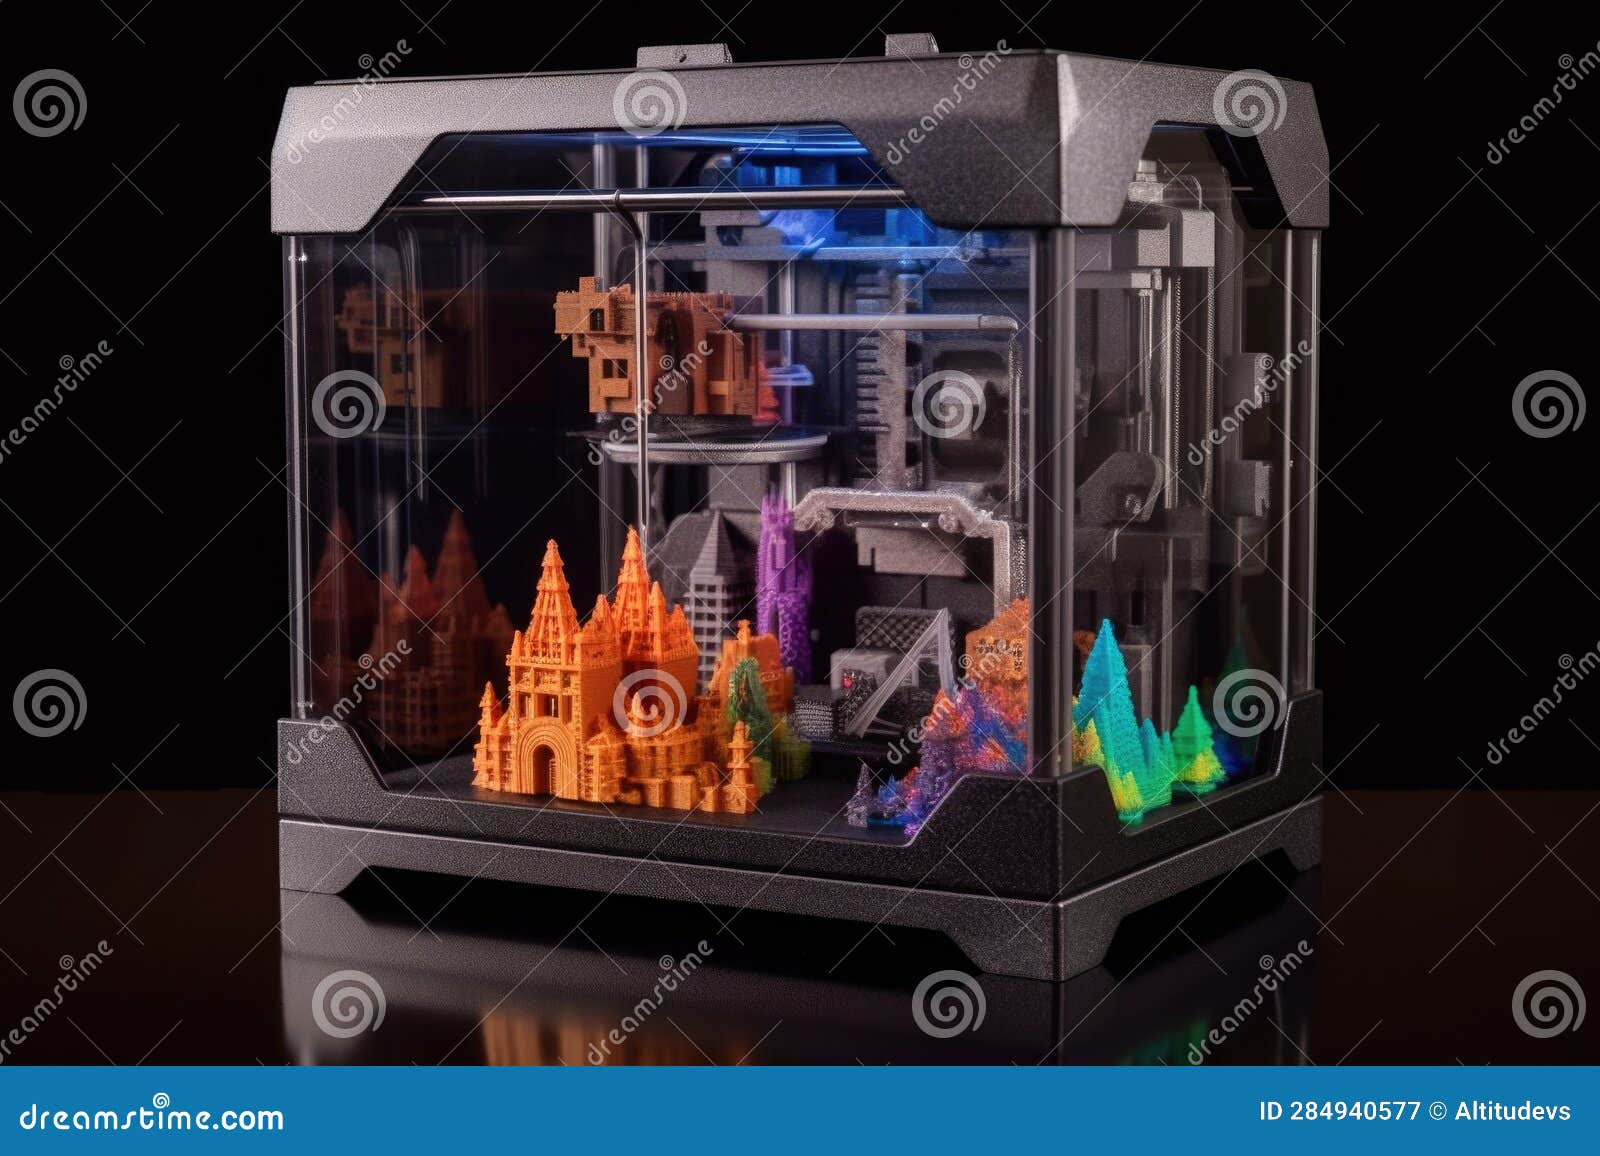 a 4d printer with multiple color filament options